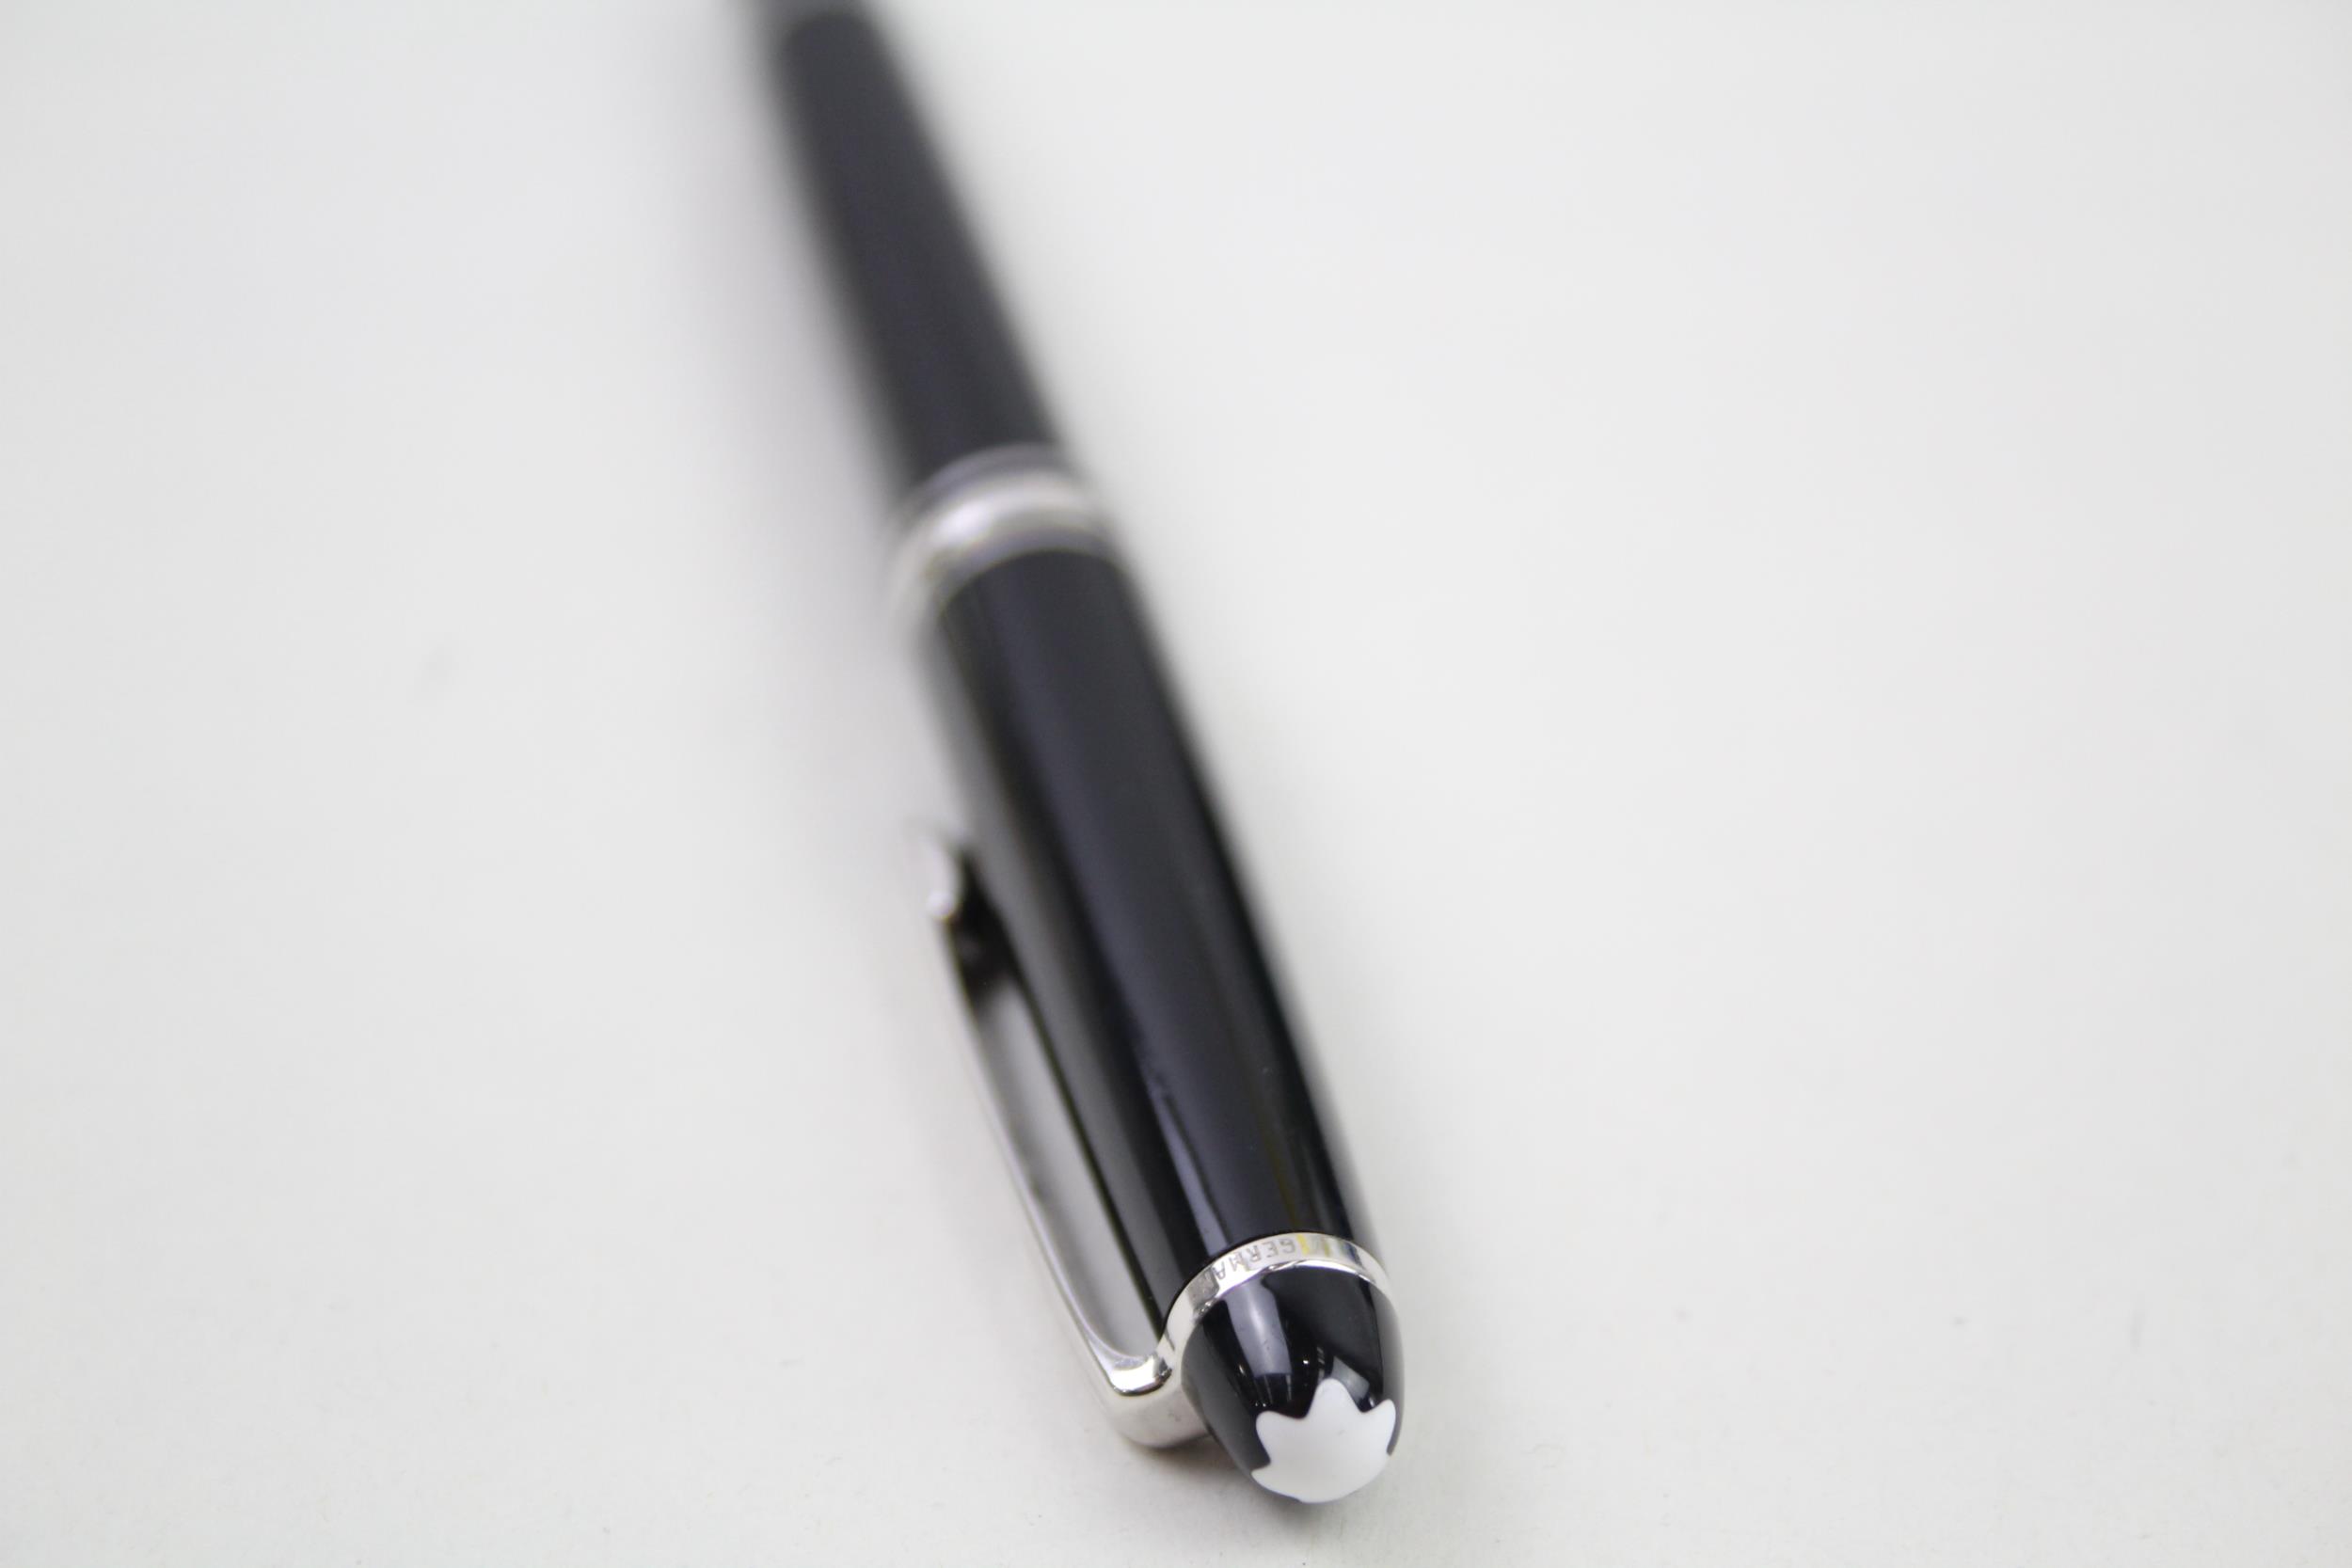 MONTBLANC Meisterstuck Black Cased Rollerball Pen - HR1155466 // UNTESTED In previously owned - Image 12 of 12